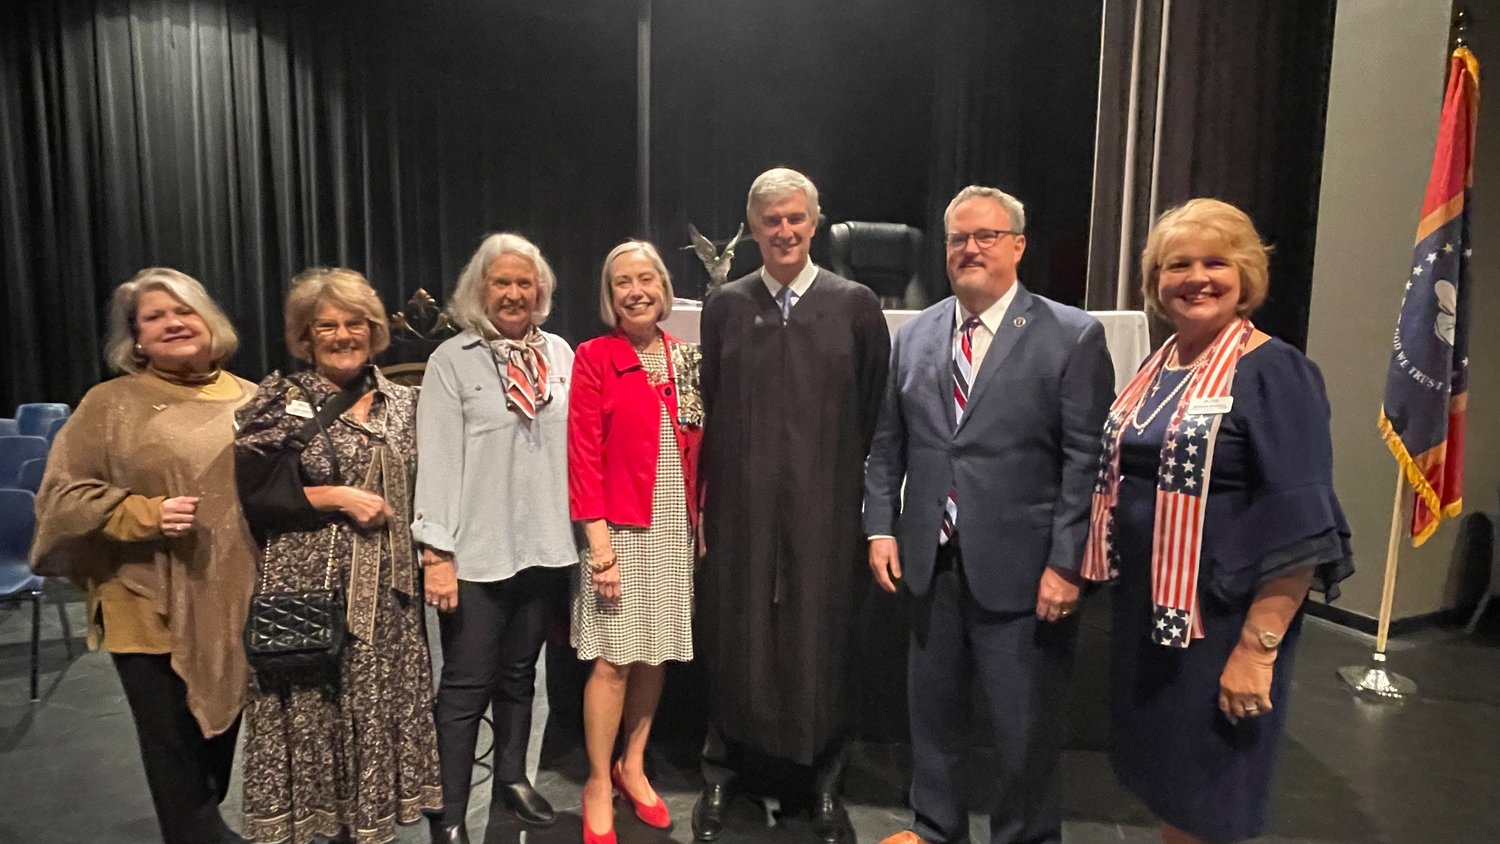 Members of the Madison chapter of the Daughters of the American Revolution stand with
U.S. District Judge Daniel P. Jordan and Clerk of Court Arthur Johnston III at the naturalization
ceremony held last week. Pictured, from left, Kathleen Schutze, Saundra Dewey,
Sally Patterson, Kay Ewing, Daniel P. Jordan III, Arthur Johnston III, and Donna Russell.